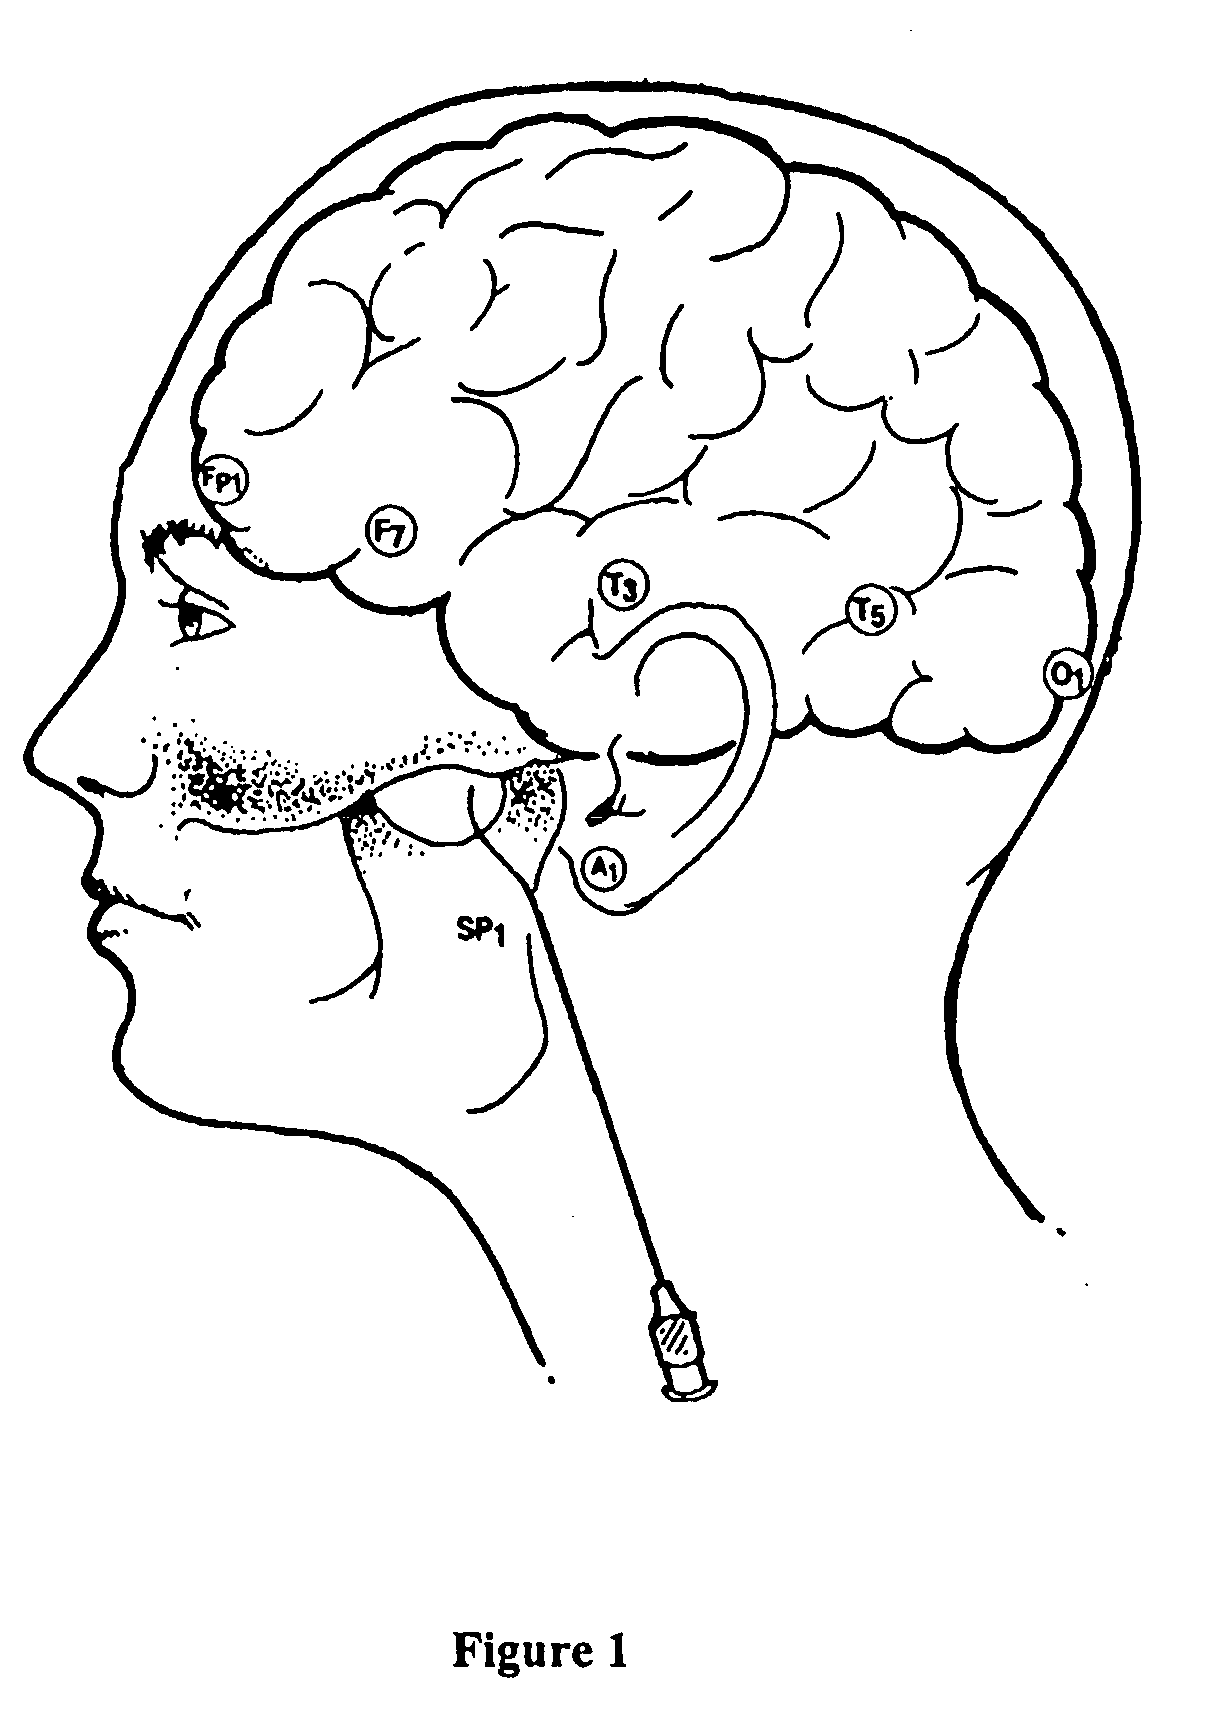 Noninvasive nonlinear systems and methods for predicting seizure